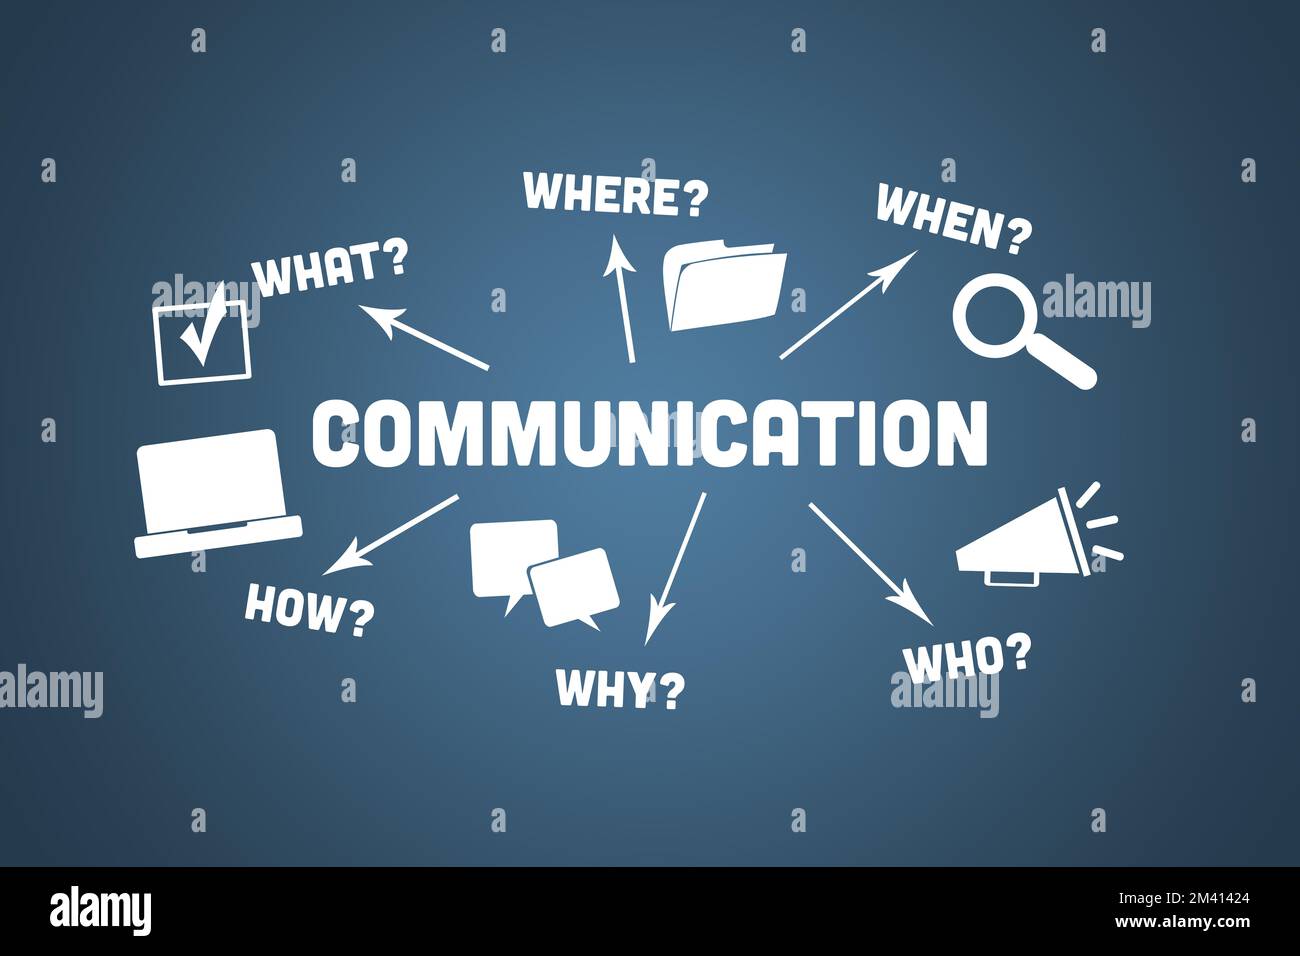 Communication concept. Illustration with icons and keywords on a blue background. Stock Photo